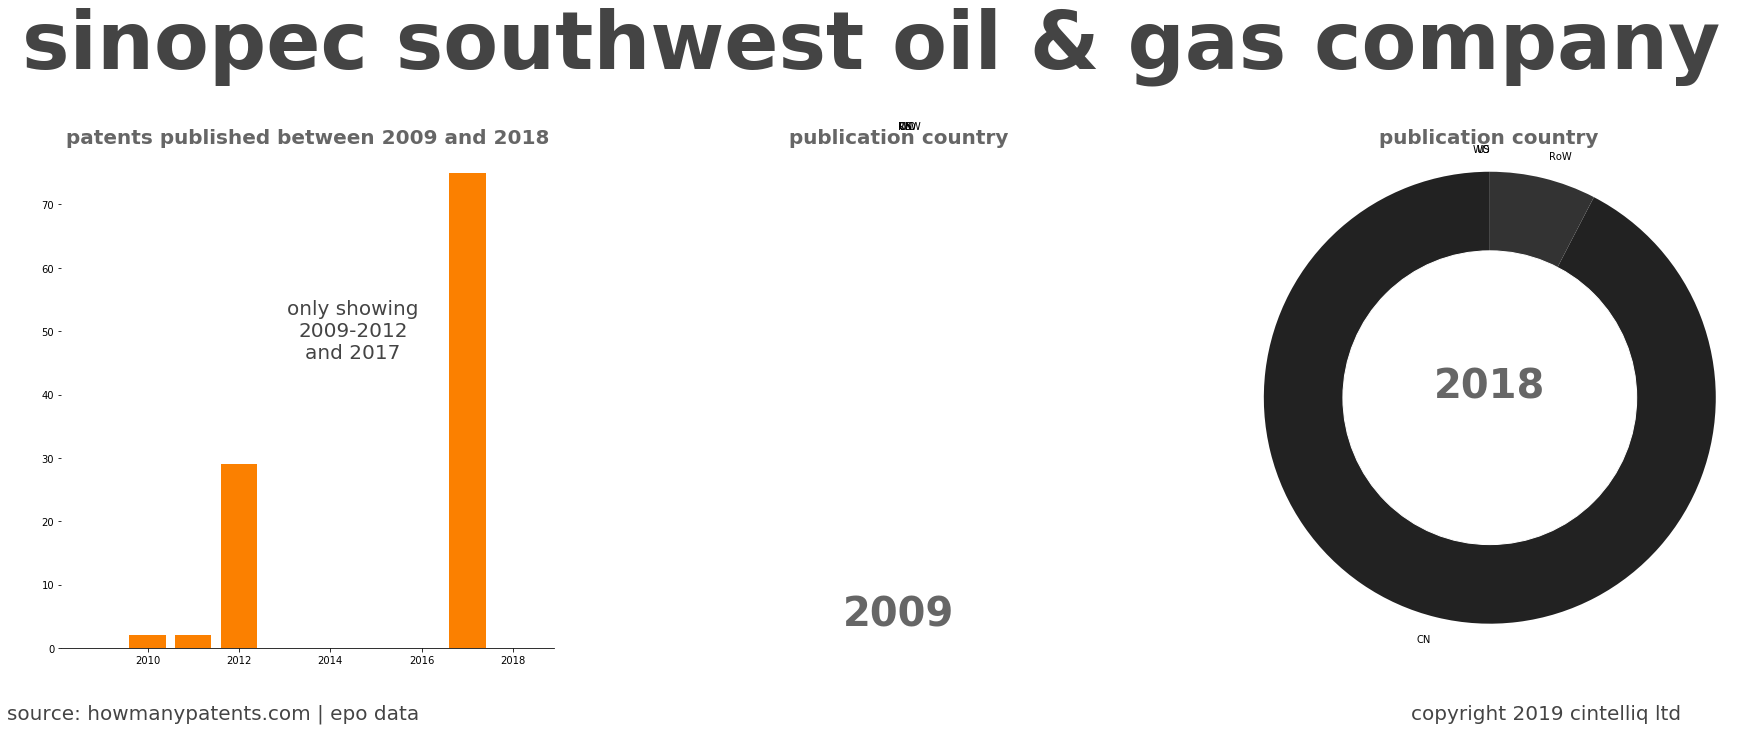 summary of patents for Sinopec Southwest Oil & Gas Company